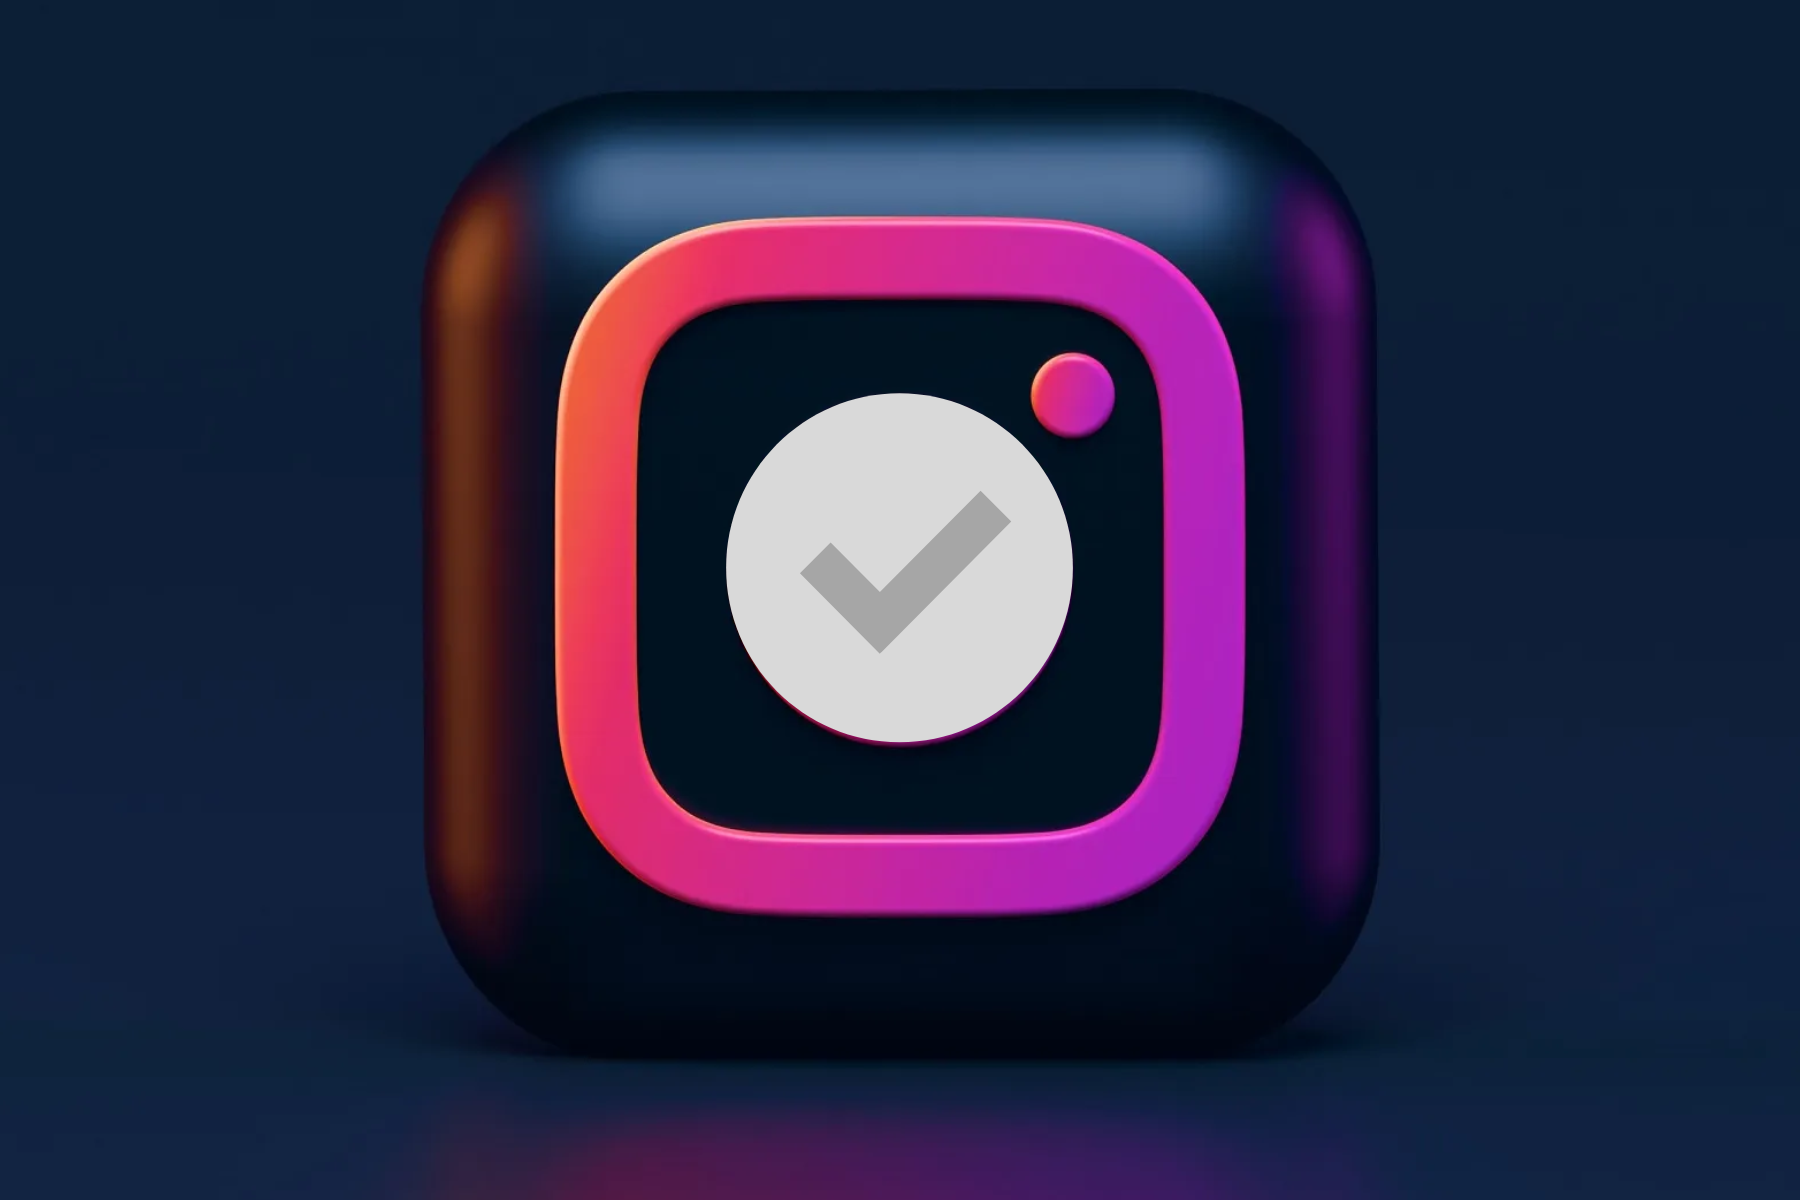 The 3D Instagram logo in the center of which is a read receipts attached